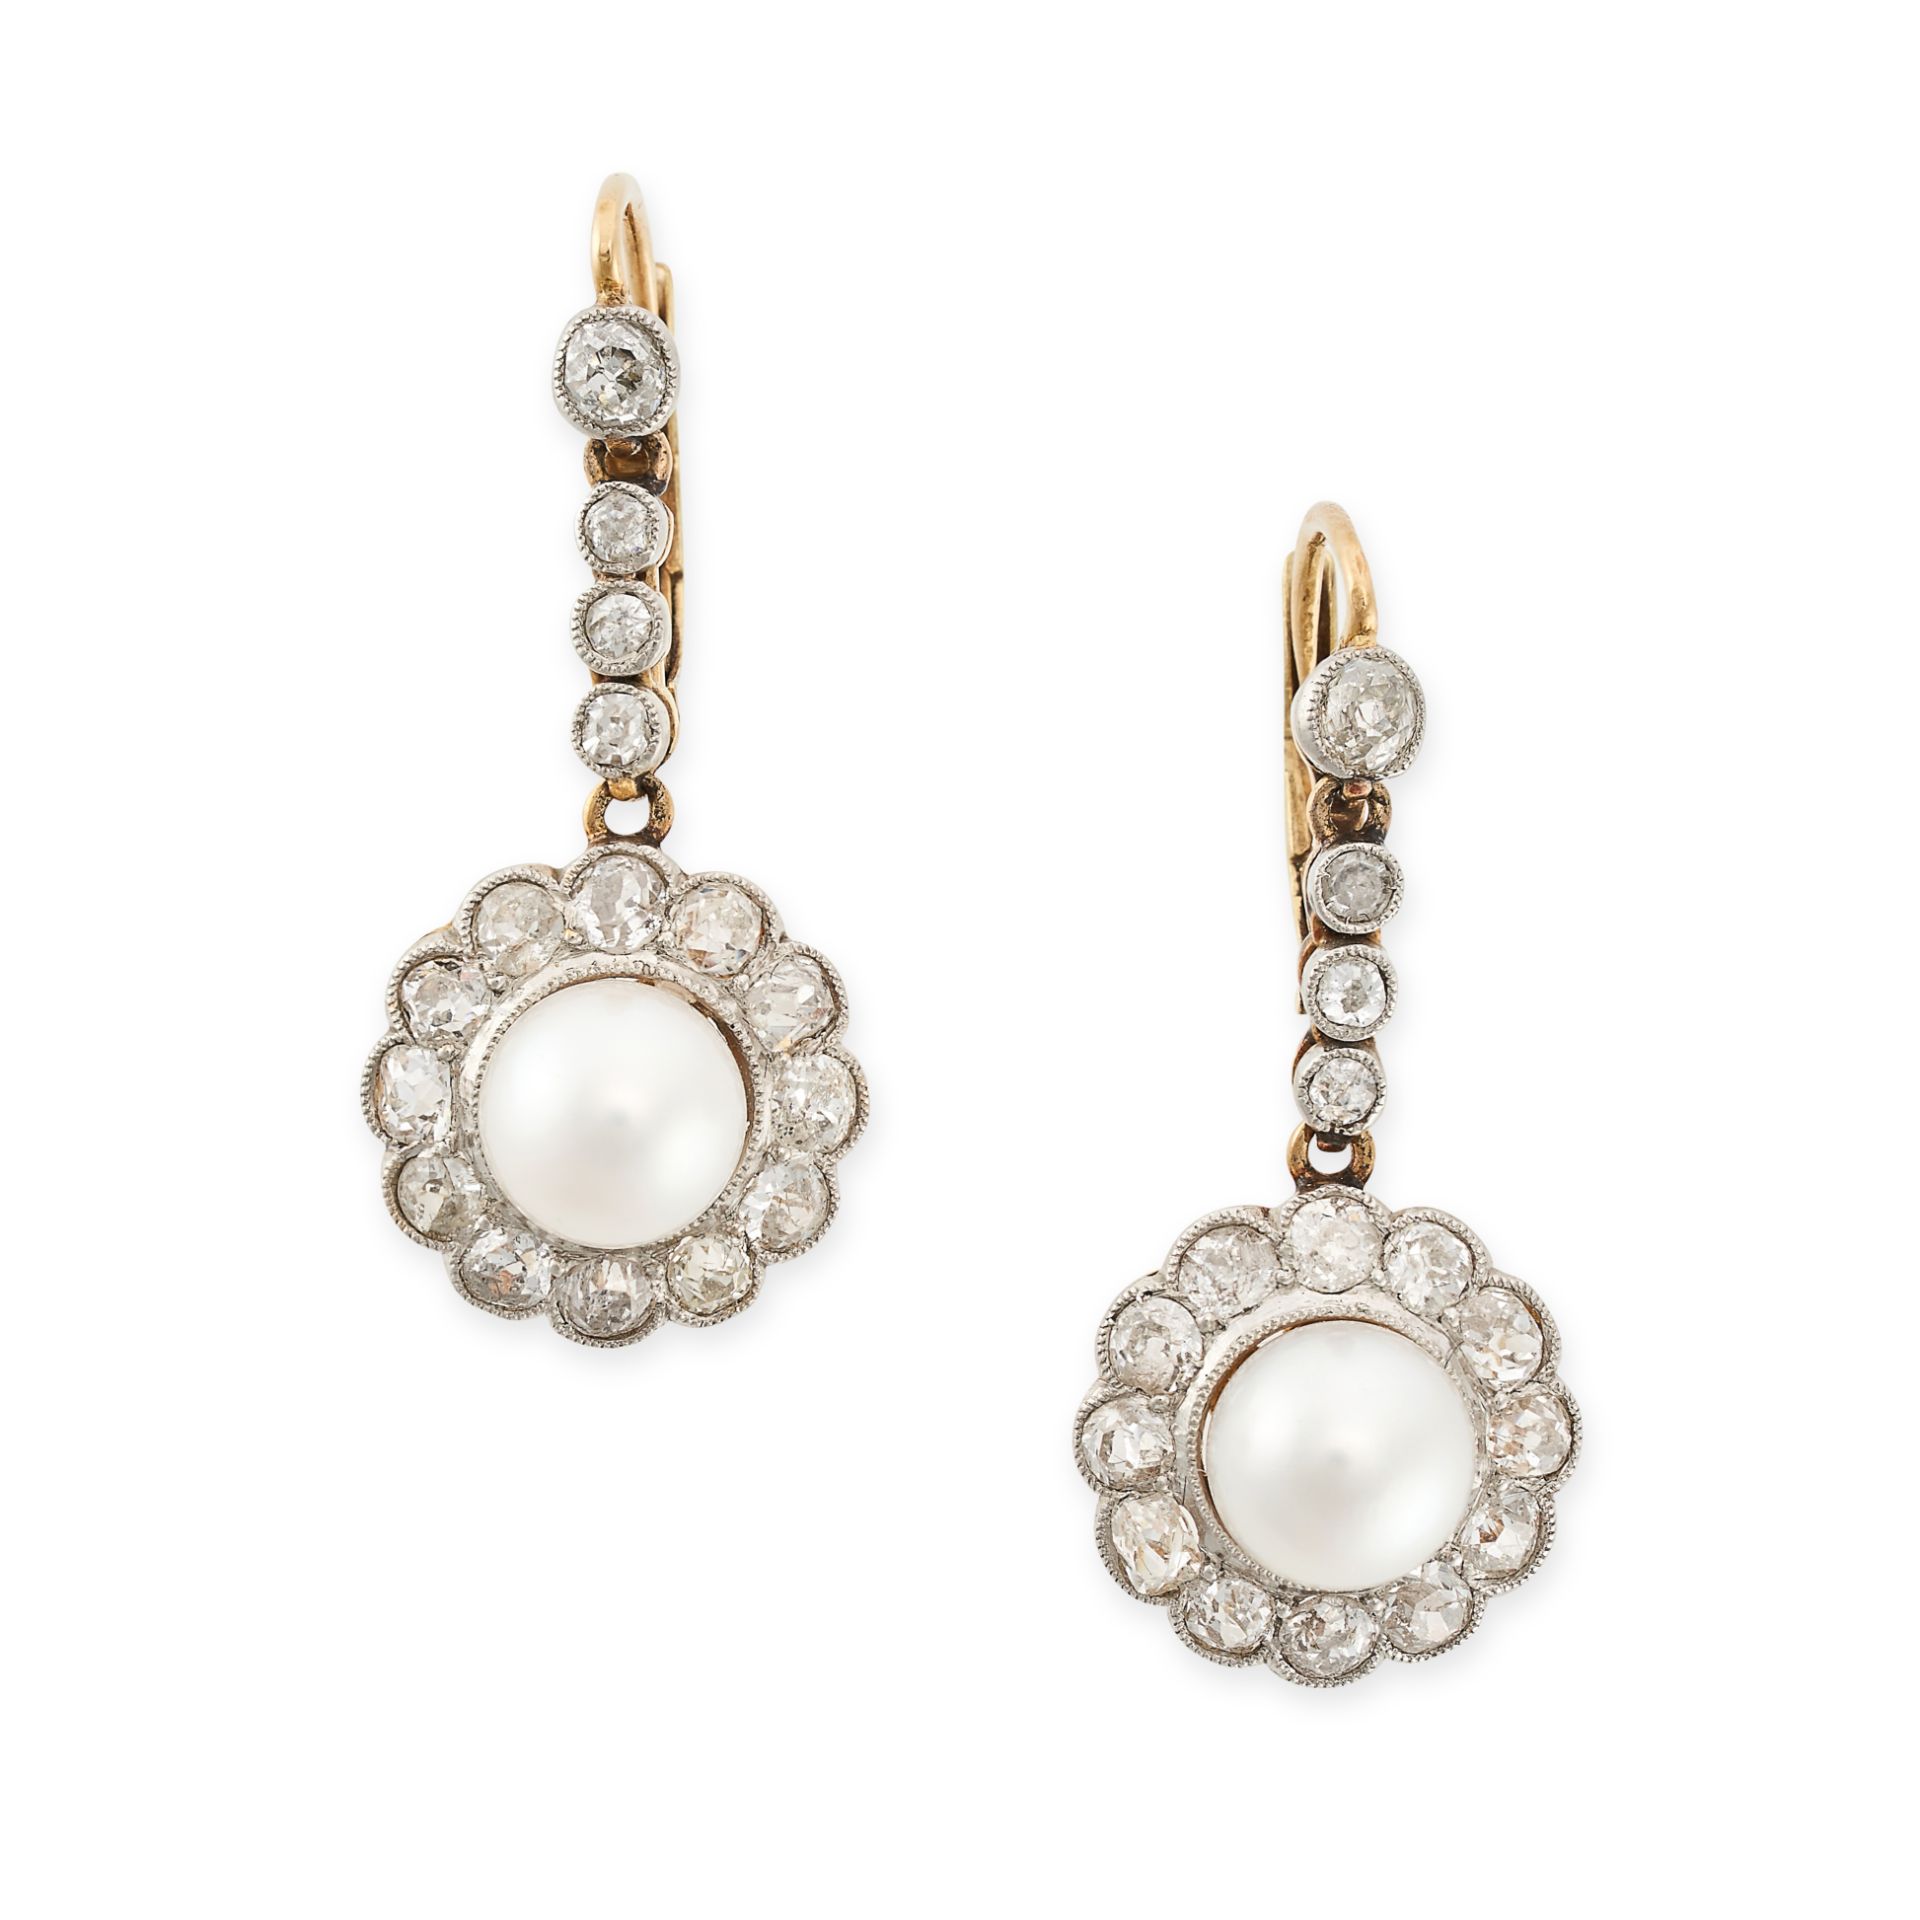 A PAIR OF PEARL AND DIAMOND CLUSTER DROP EARRINGS in 14ct yellow gold and platinum, each set with